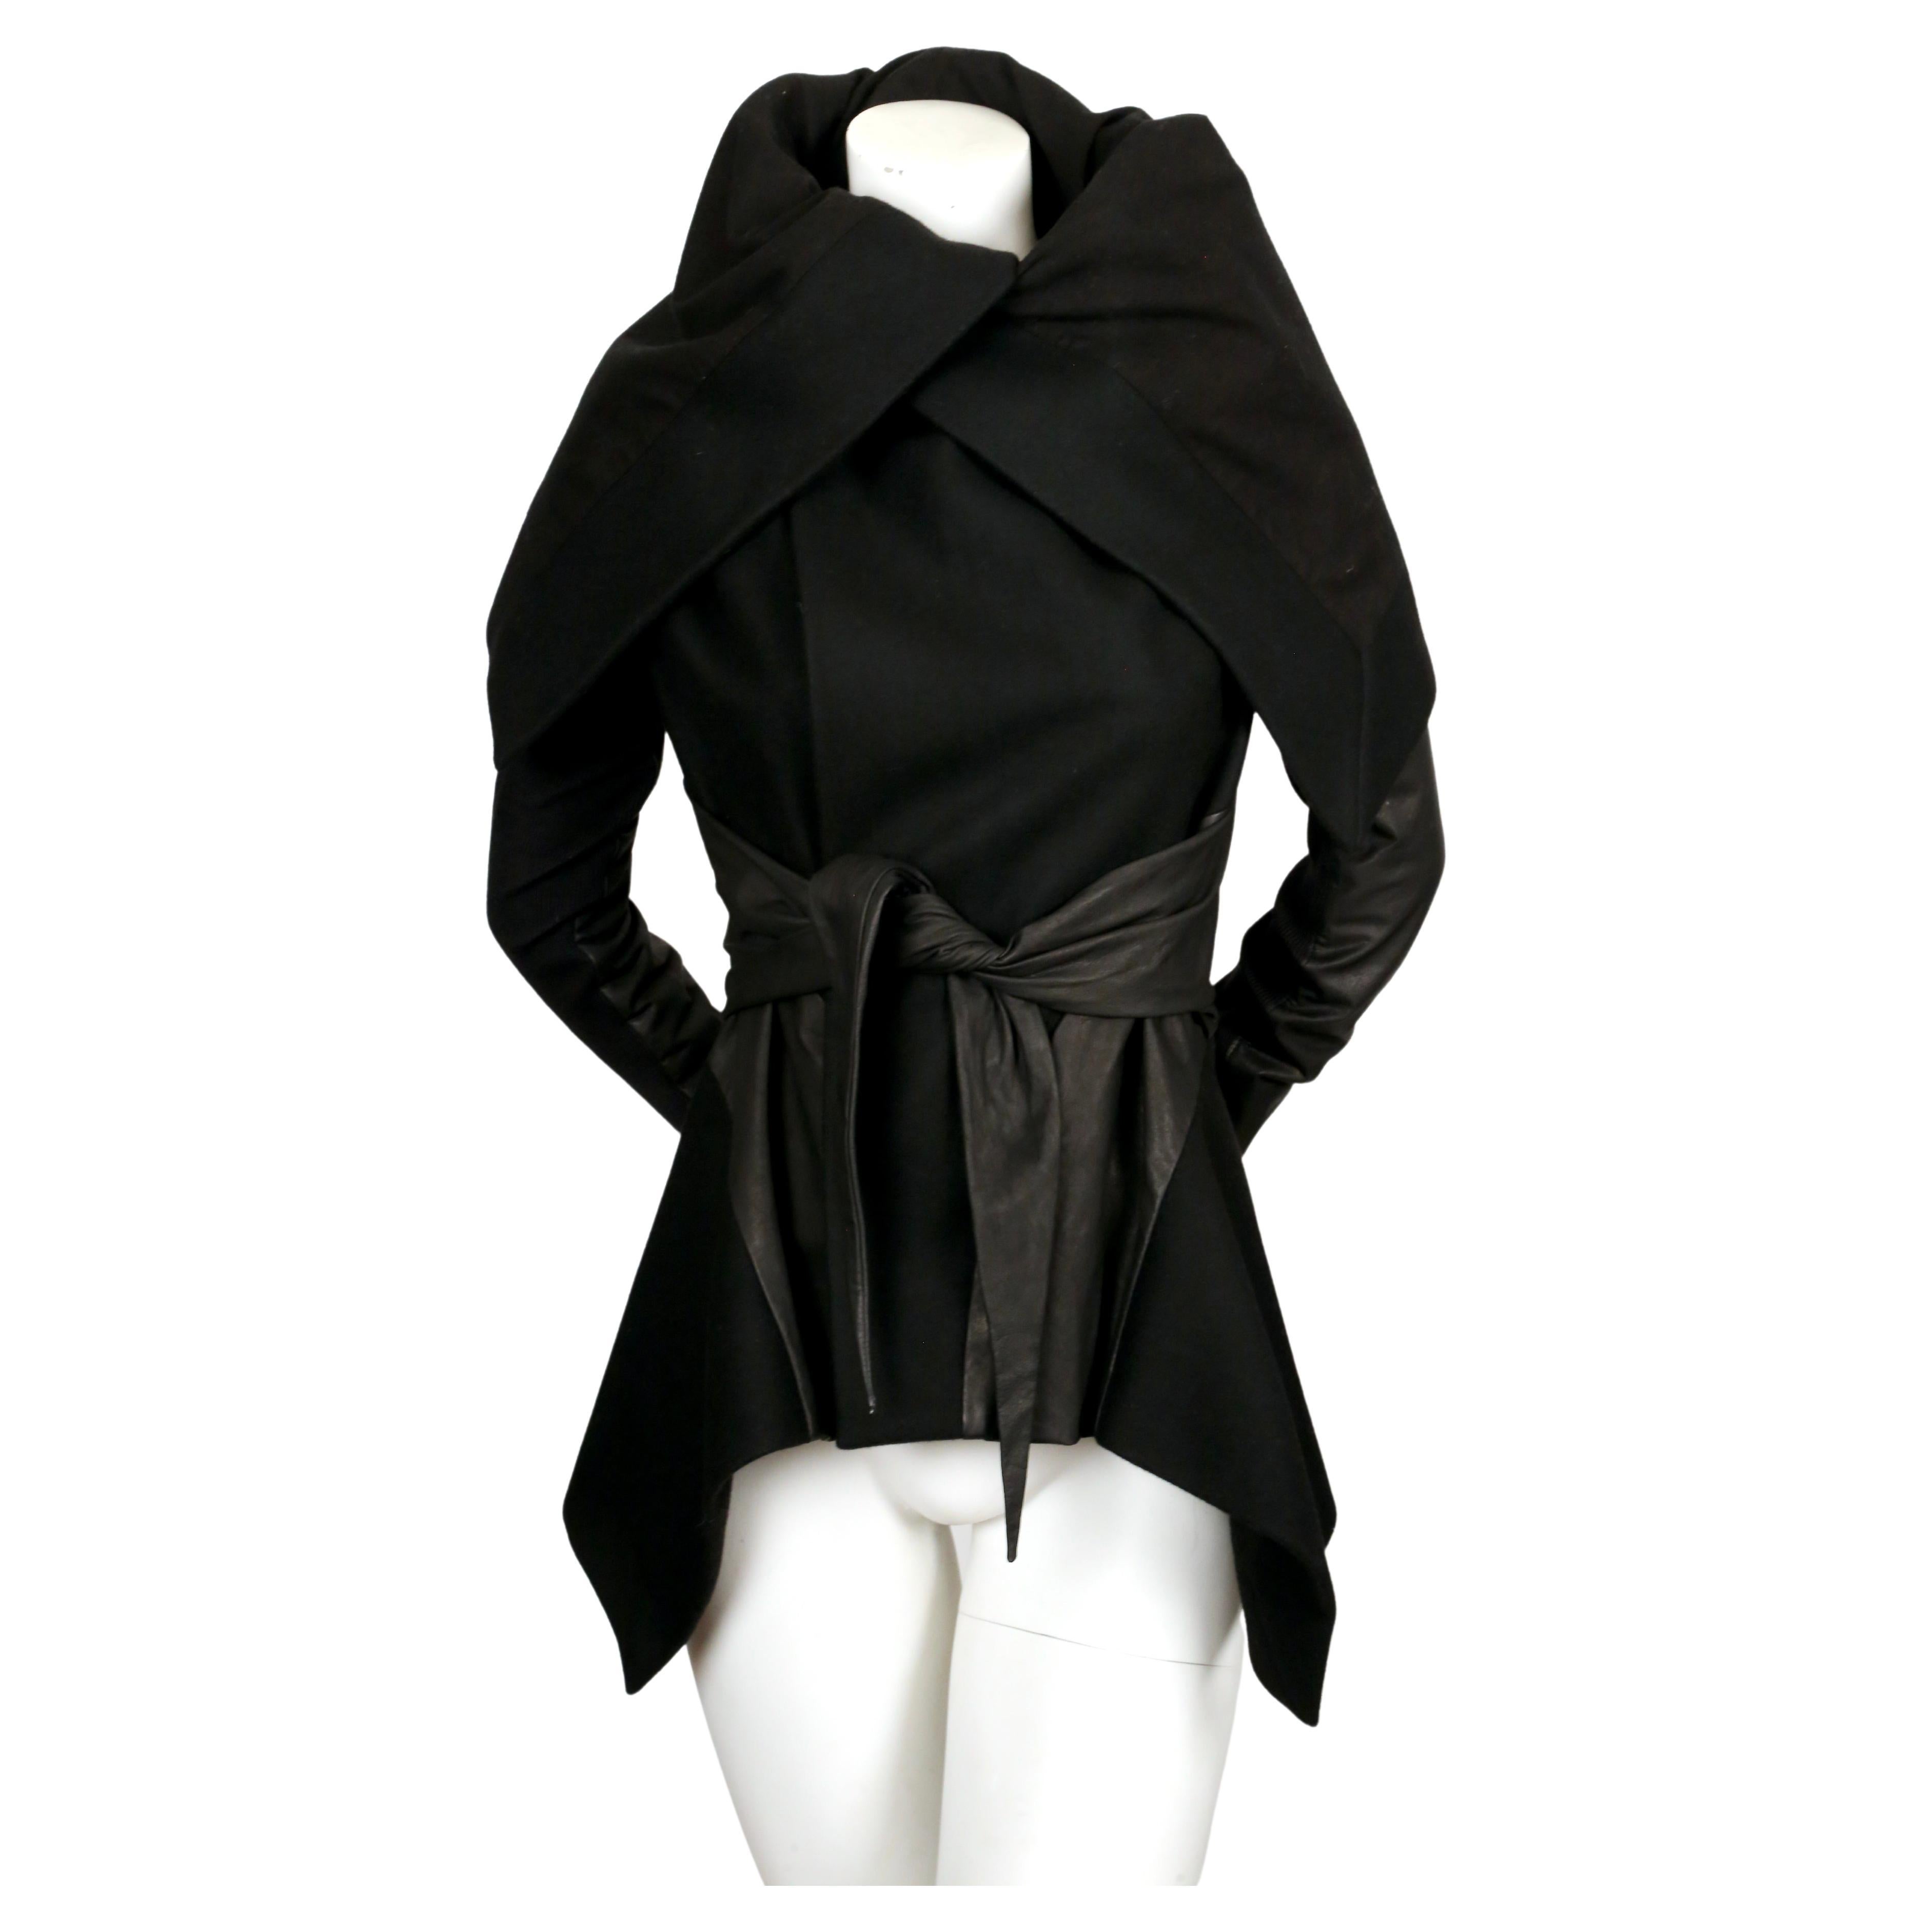 Jet-black, soft wool and cotton jacket with leather sleeves, self tie belt and asymmetrical hemline from Rick Owens. Italian size 40 which best fits a US 4 or slim 6. Coat has a very fitted shoulder and arm due to signature ribbed inserts at inside